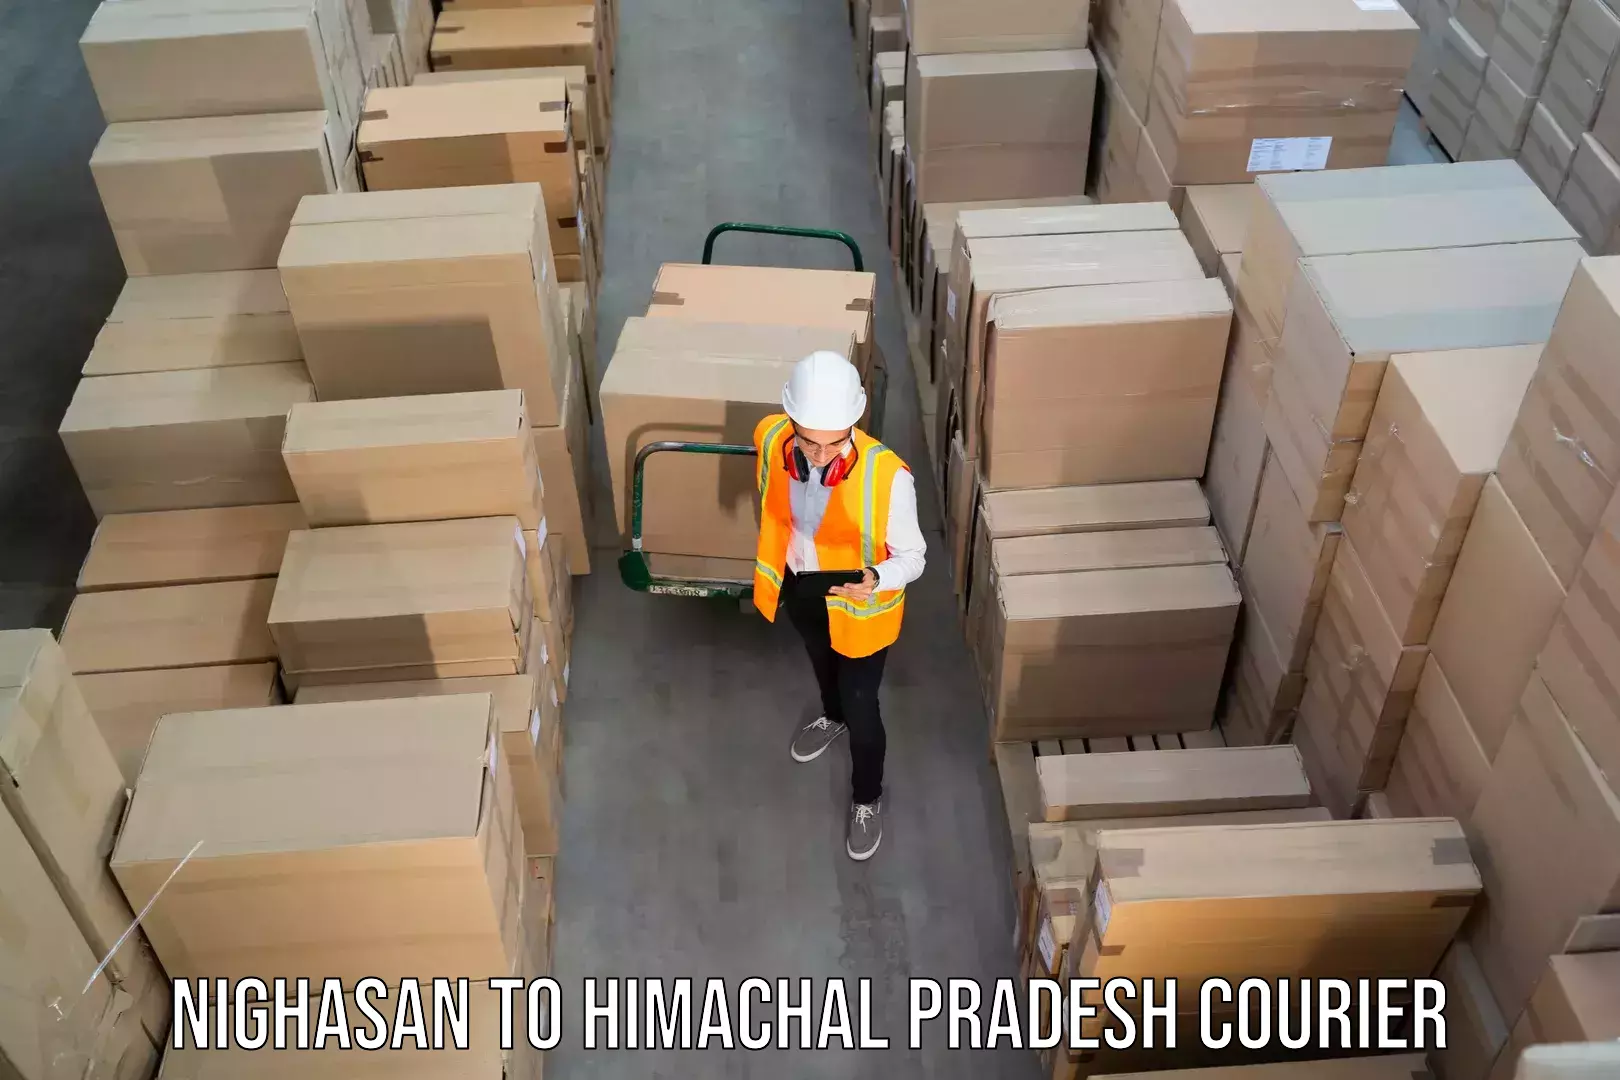 Subscription-based courier Nighasan to Jukhala